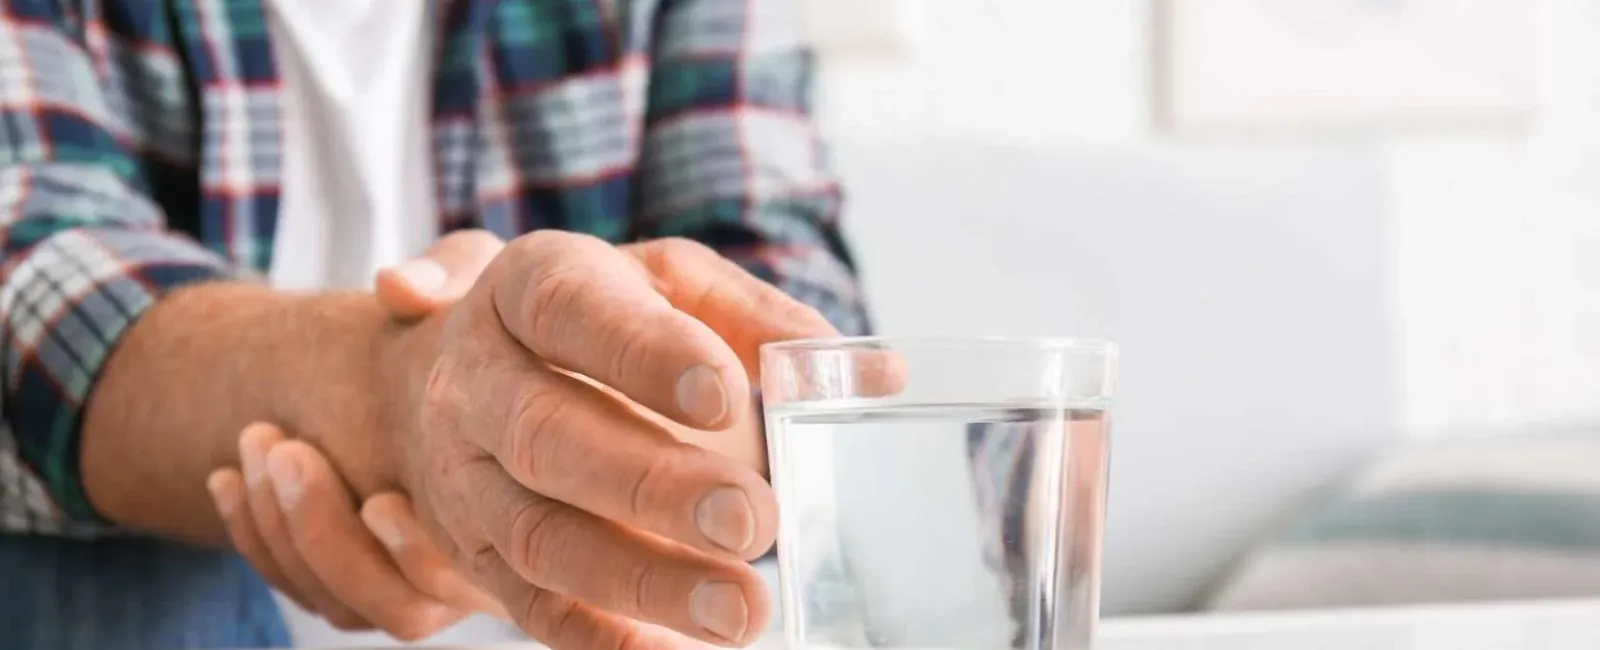 a close-up of hands holding a glass of water